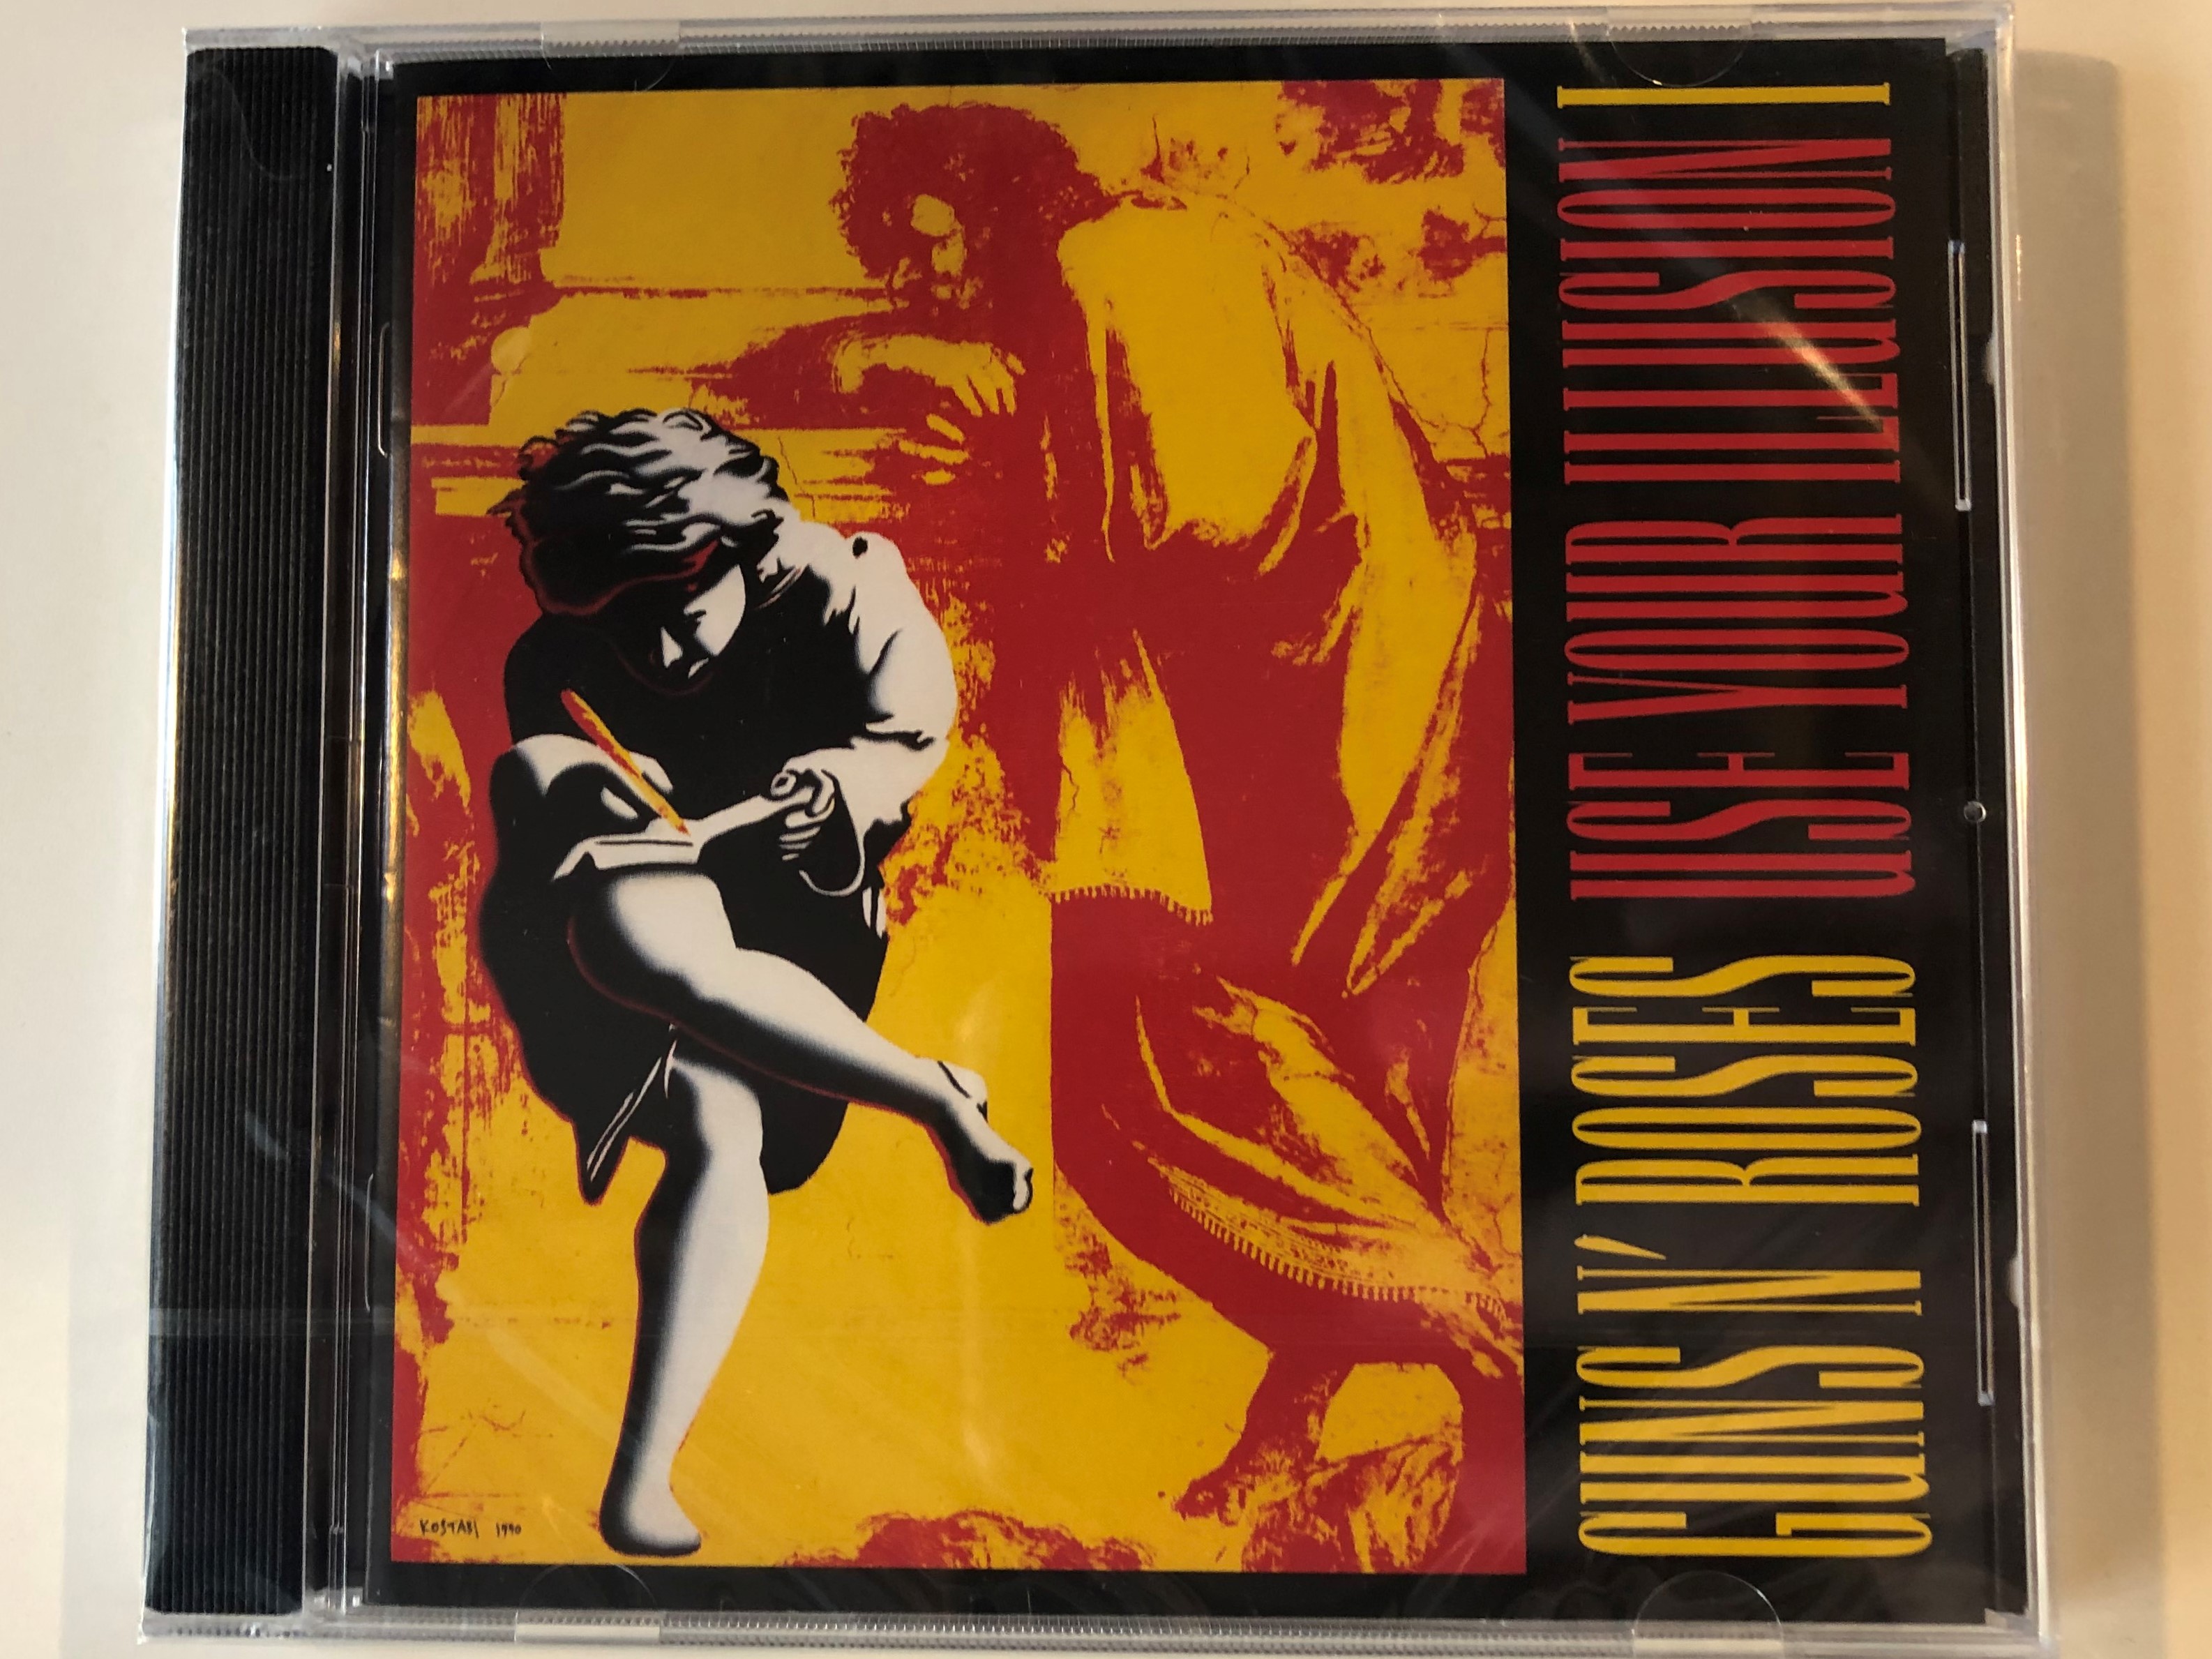 guns-n-roses-use-your-illusion-i-geffen-records-audio-cd-1991-ged-24415-1-.jpg